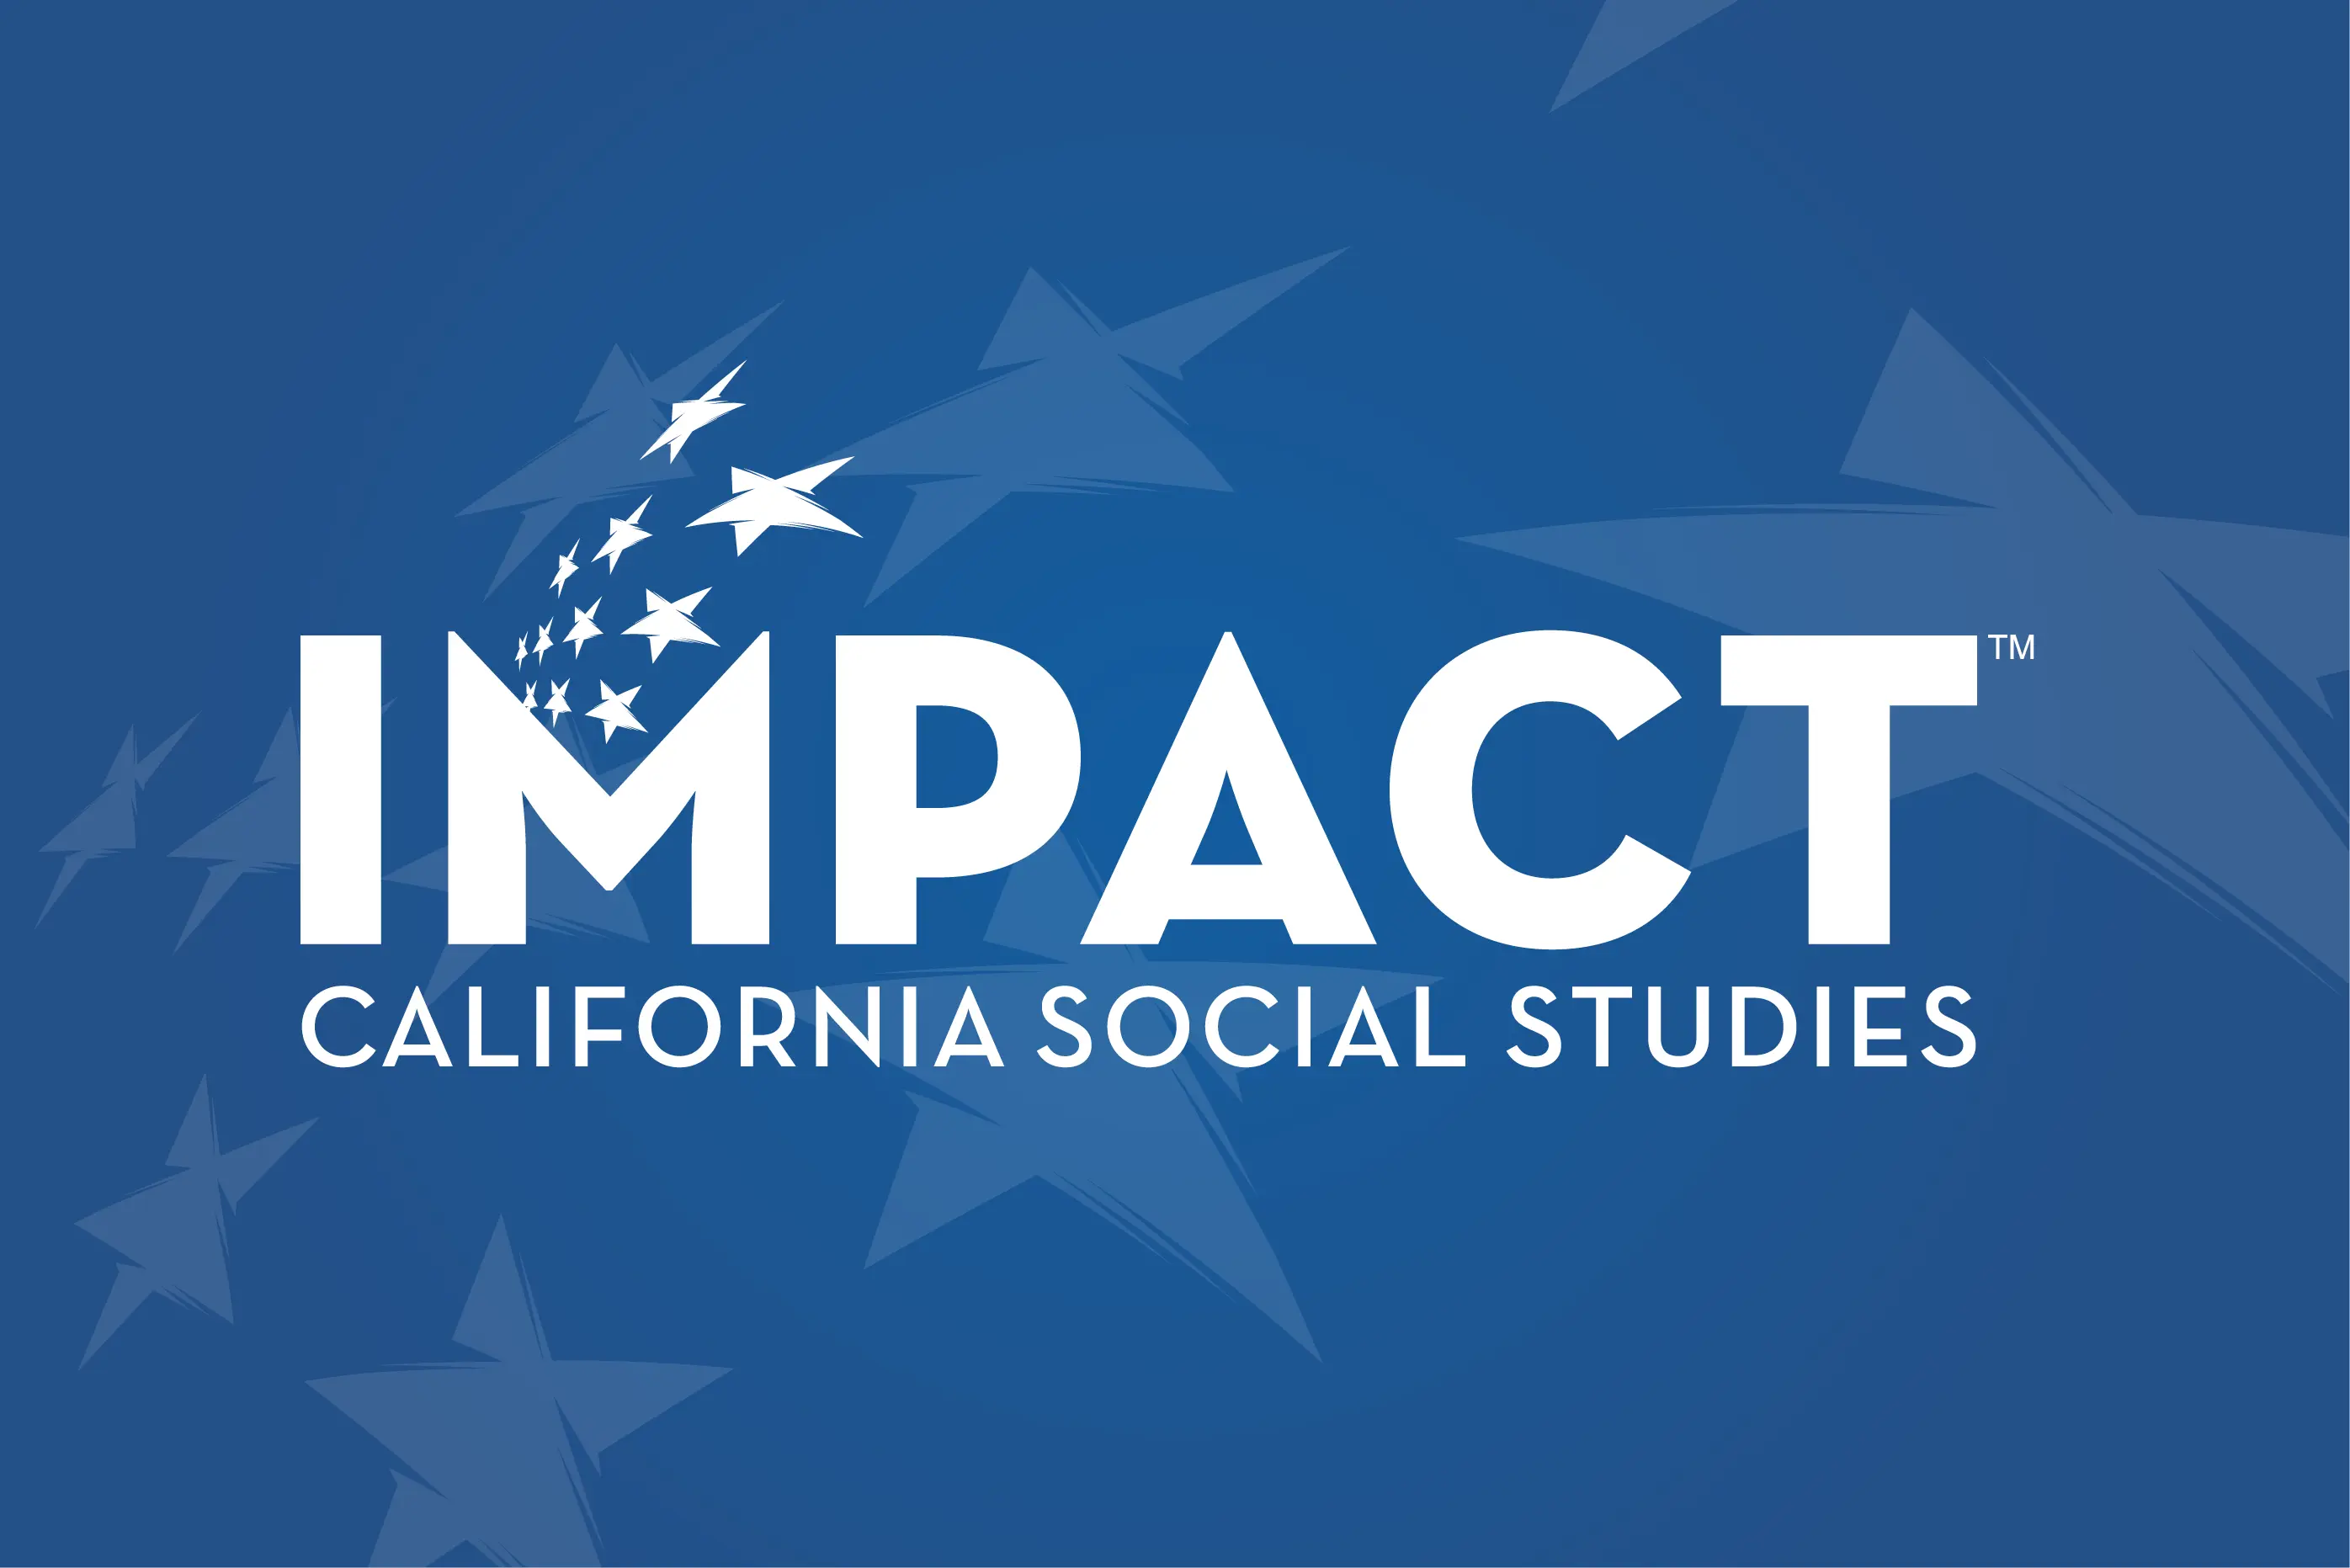 IMPACT California Social Studies Logo on a blue background that includes some star textures from the brand.